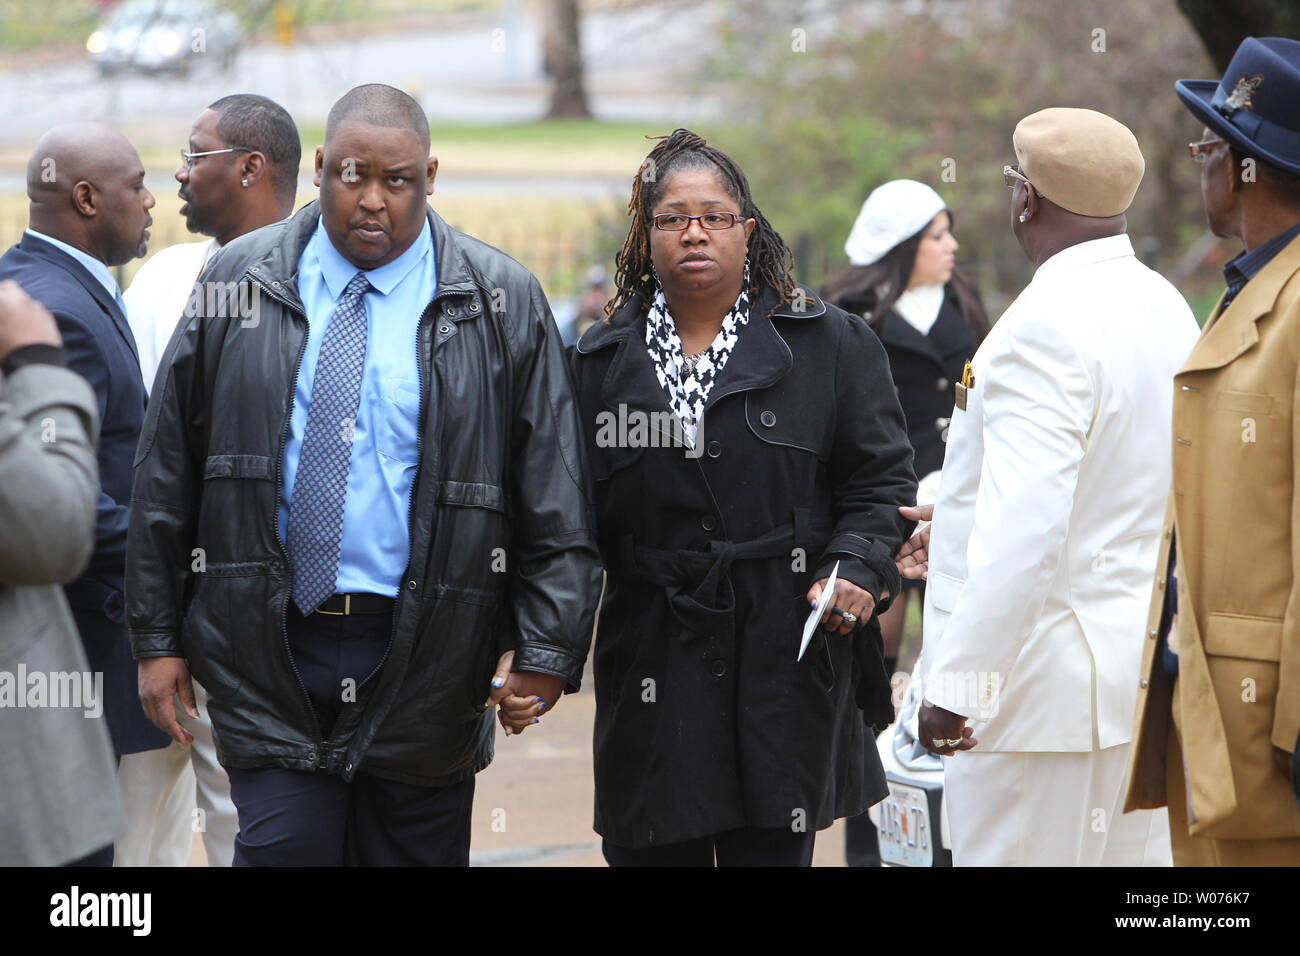 Relatives of Jerry Brown, Jr. arrive for his funeral at the Hopewell Missionary Baptist Church in St. Louis on December 15, 2012. The Dallas CowboysÕ practice squad nose tackle was killed in an Irving car accident on December 8, 2012 when his best friend and teammate Josh Brent hit a curb, flipping the vehicle.    UPI/Bill Greenblatt Stock Photo